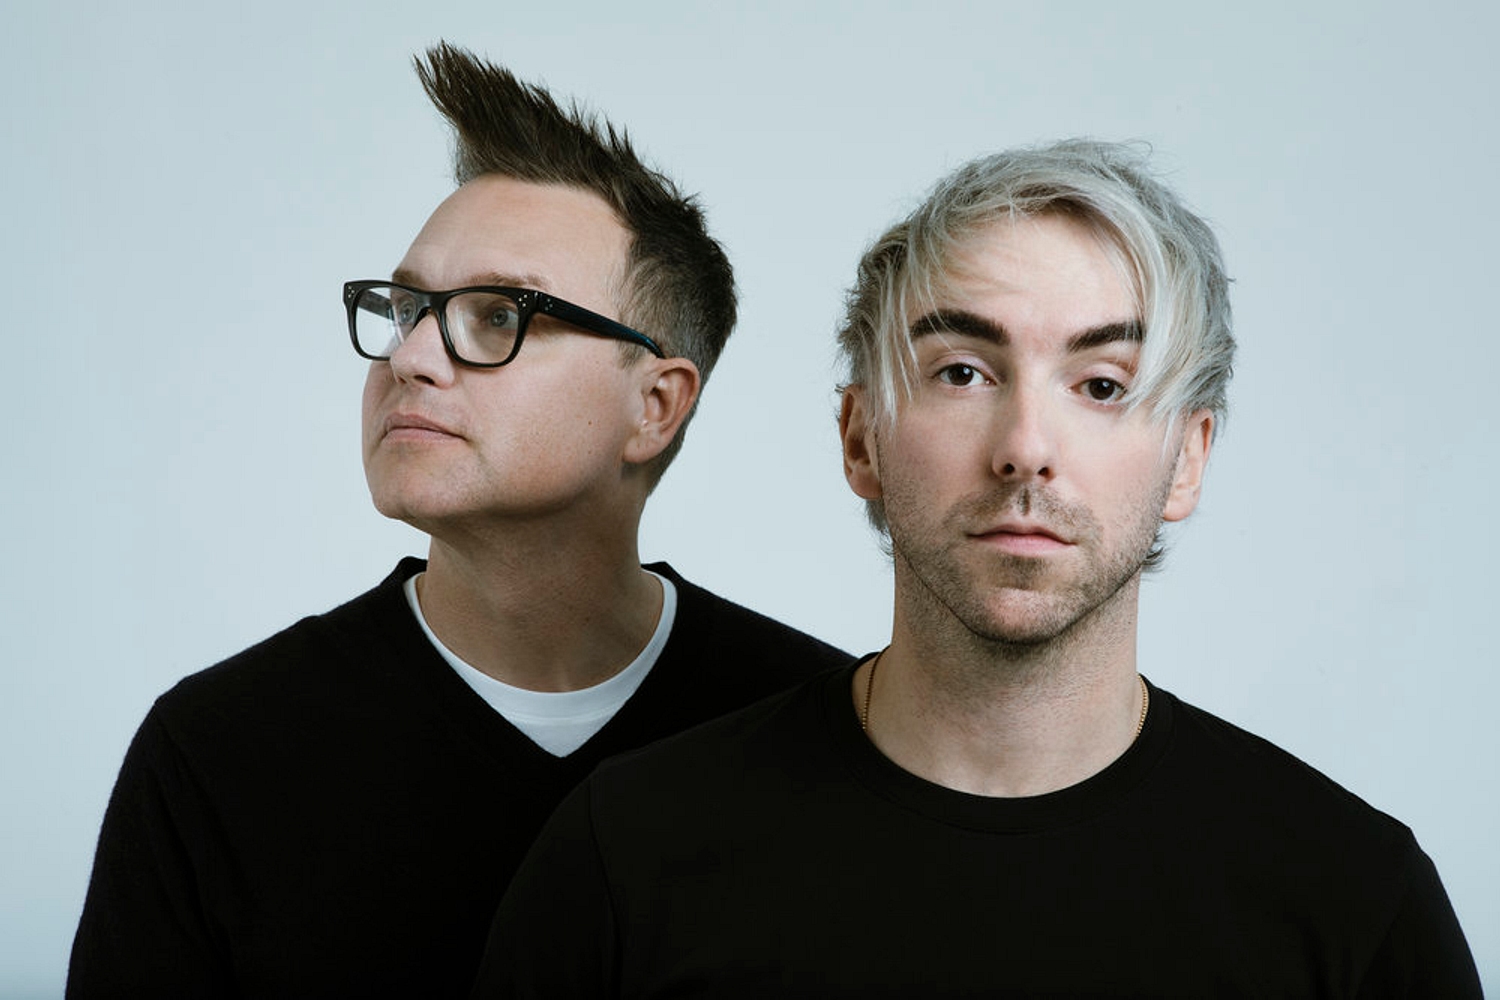 blink-182’s Mark Hoppus and All Time Low’s Alex Gaskarth unite as Simple Creatures